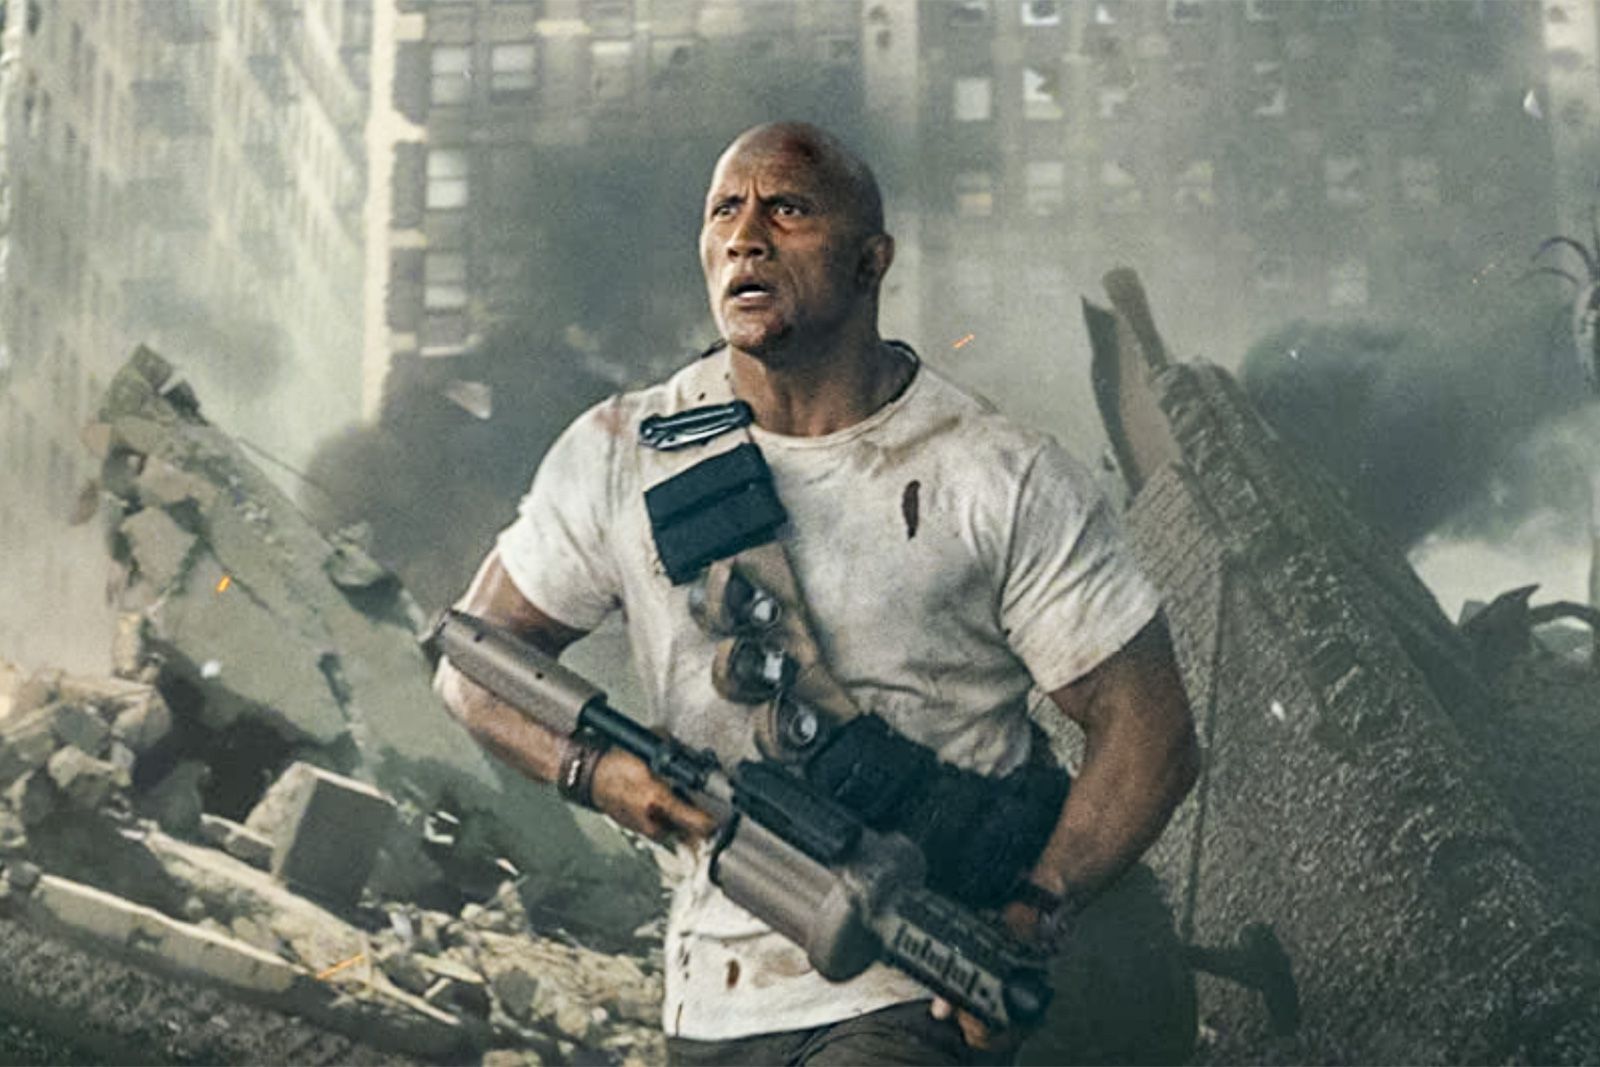 Call of Duty movie to star Dwayne 